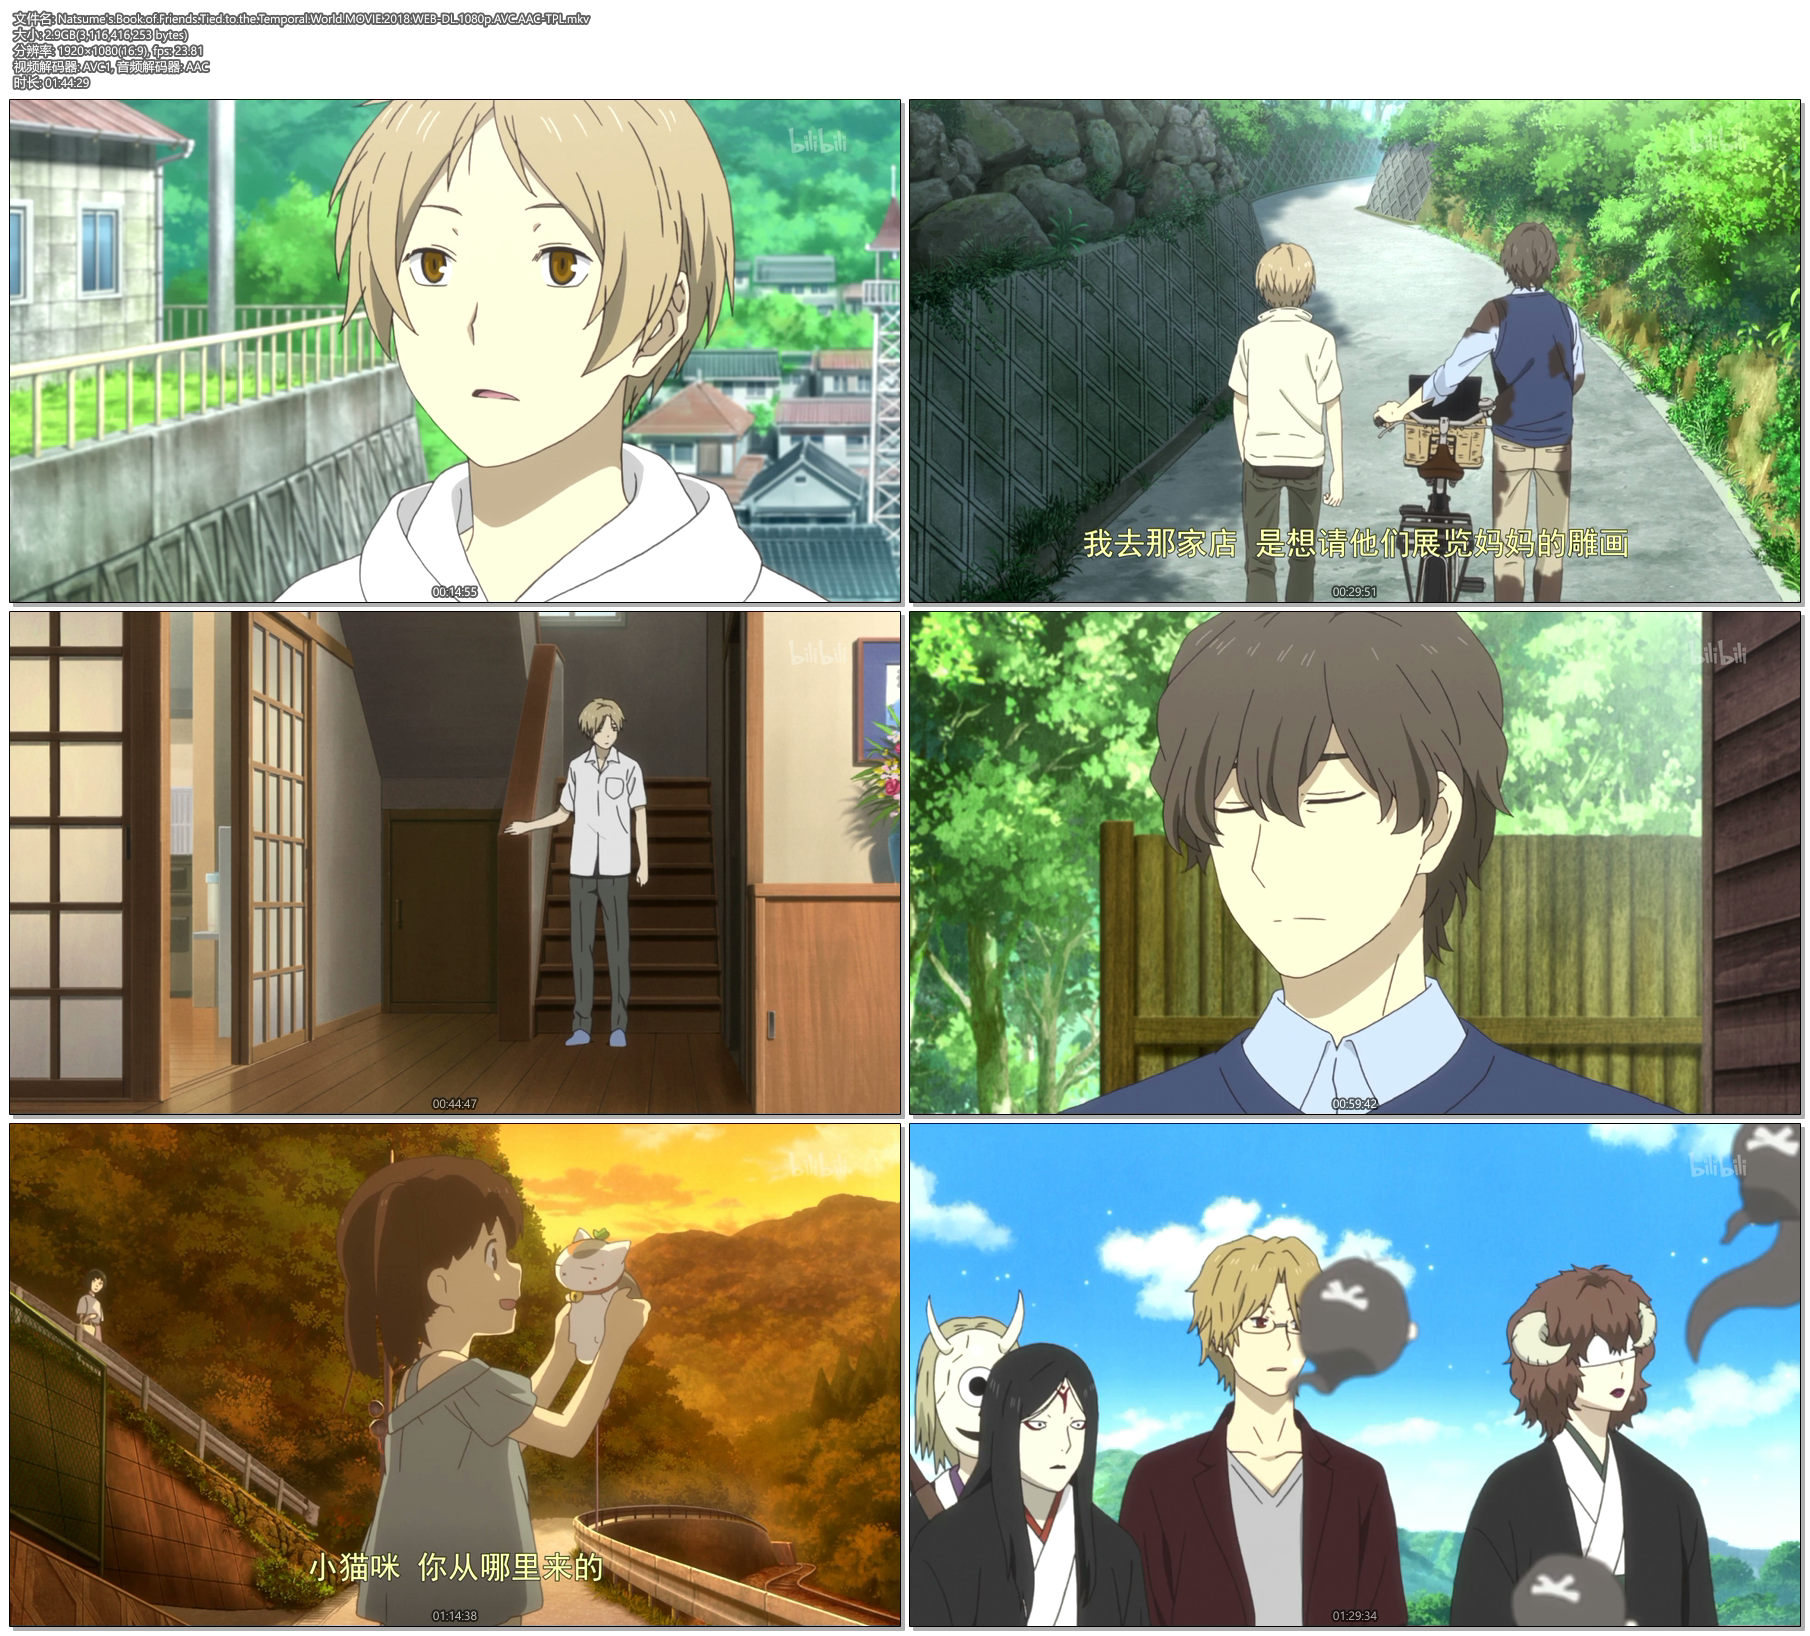 Natsume's_Book_of_Friends_Tied_to_the_Temporal_World_MOVIE_2018_WEB-DL_1080p_AVC_AAC-TPL_mkv.png